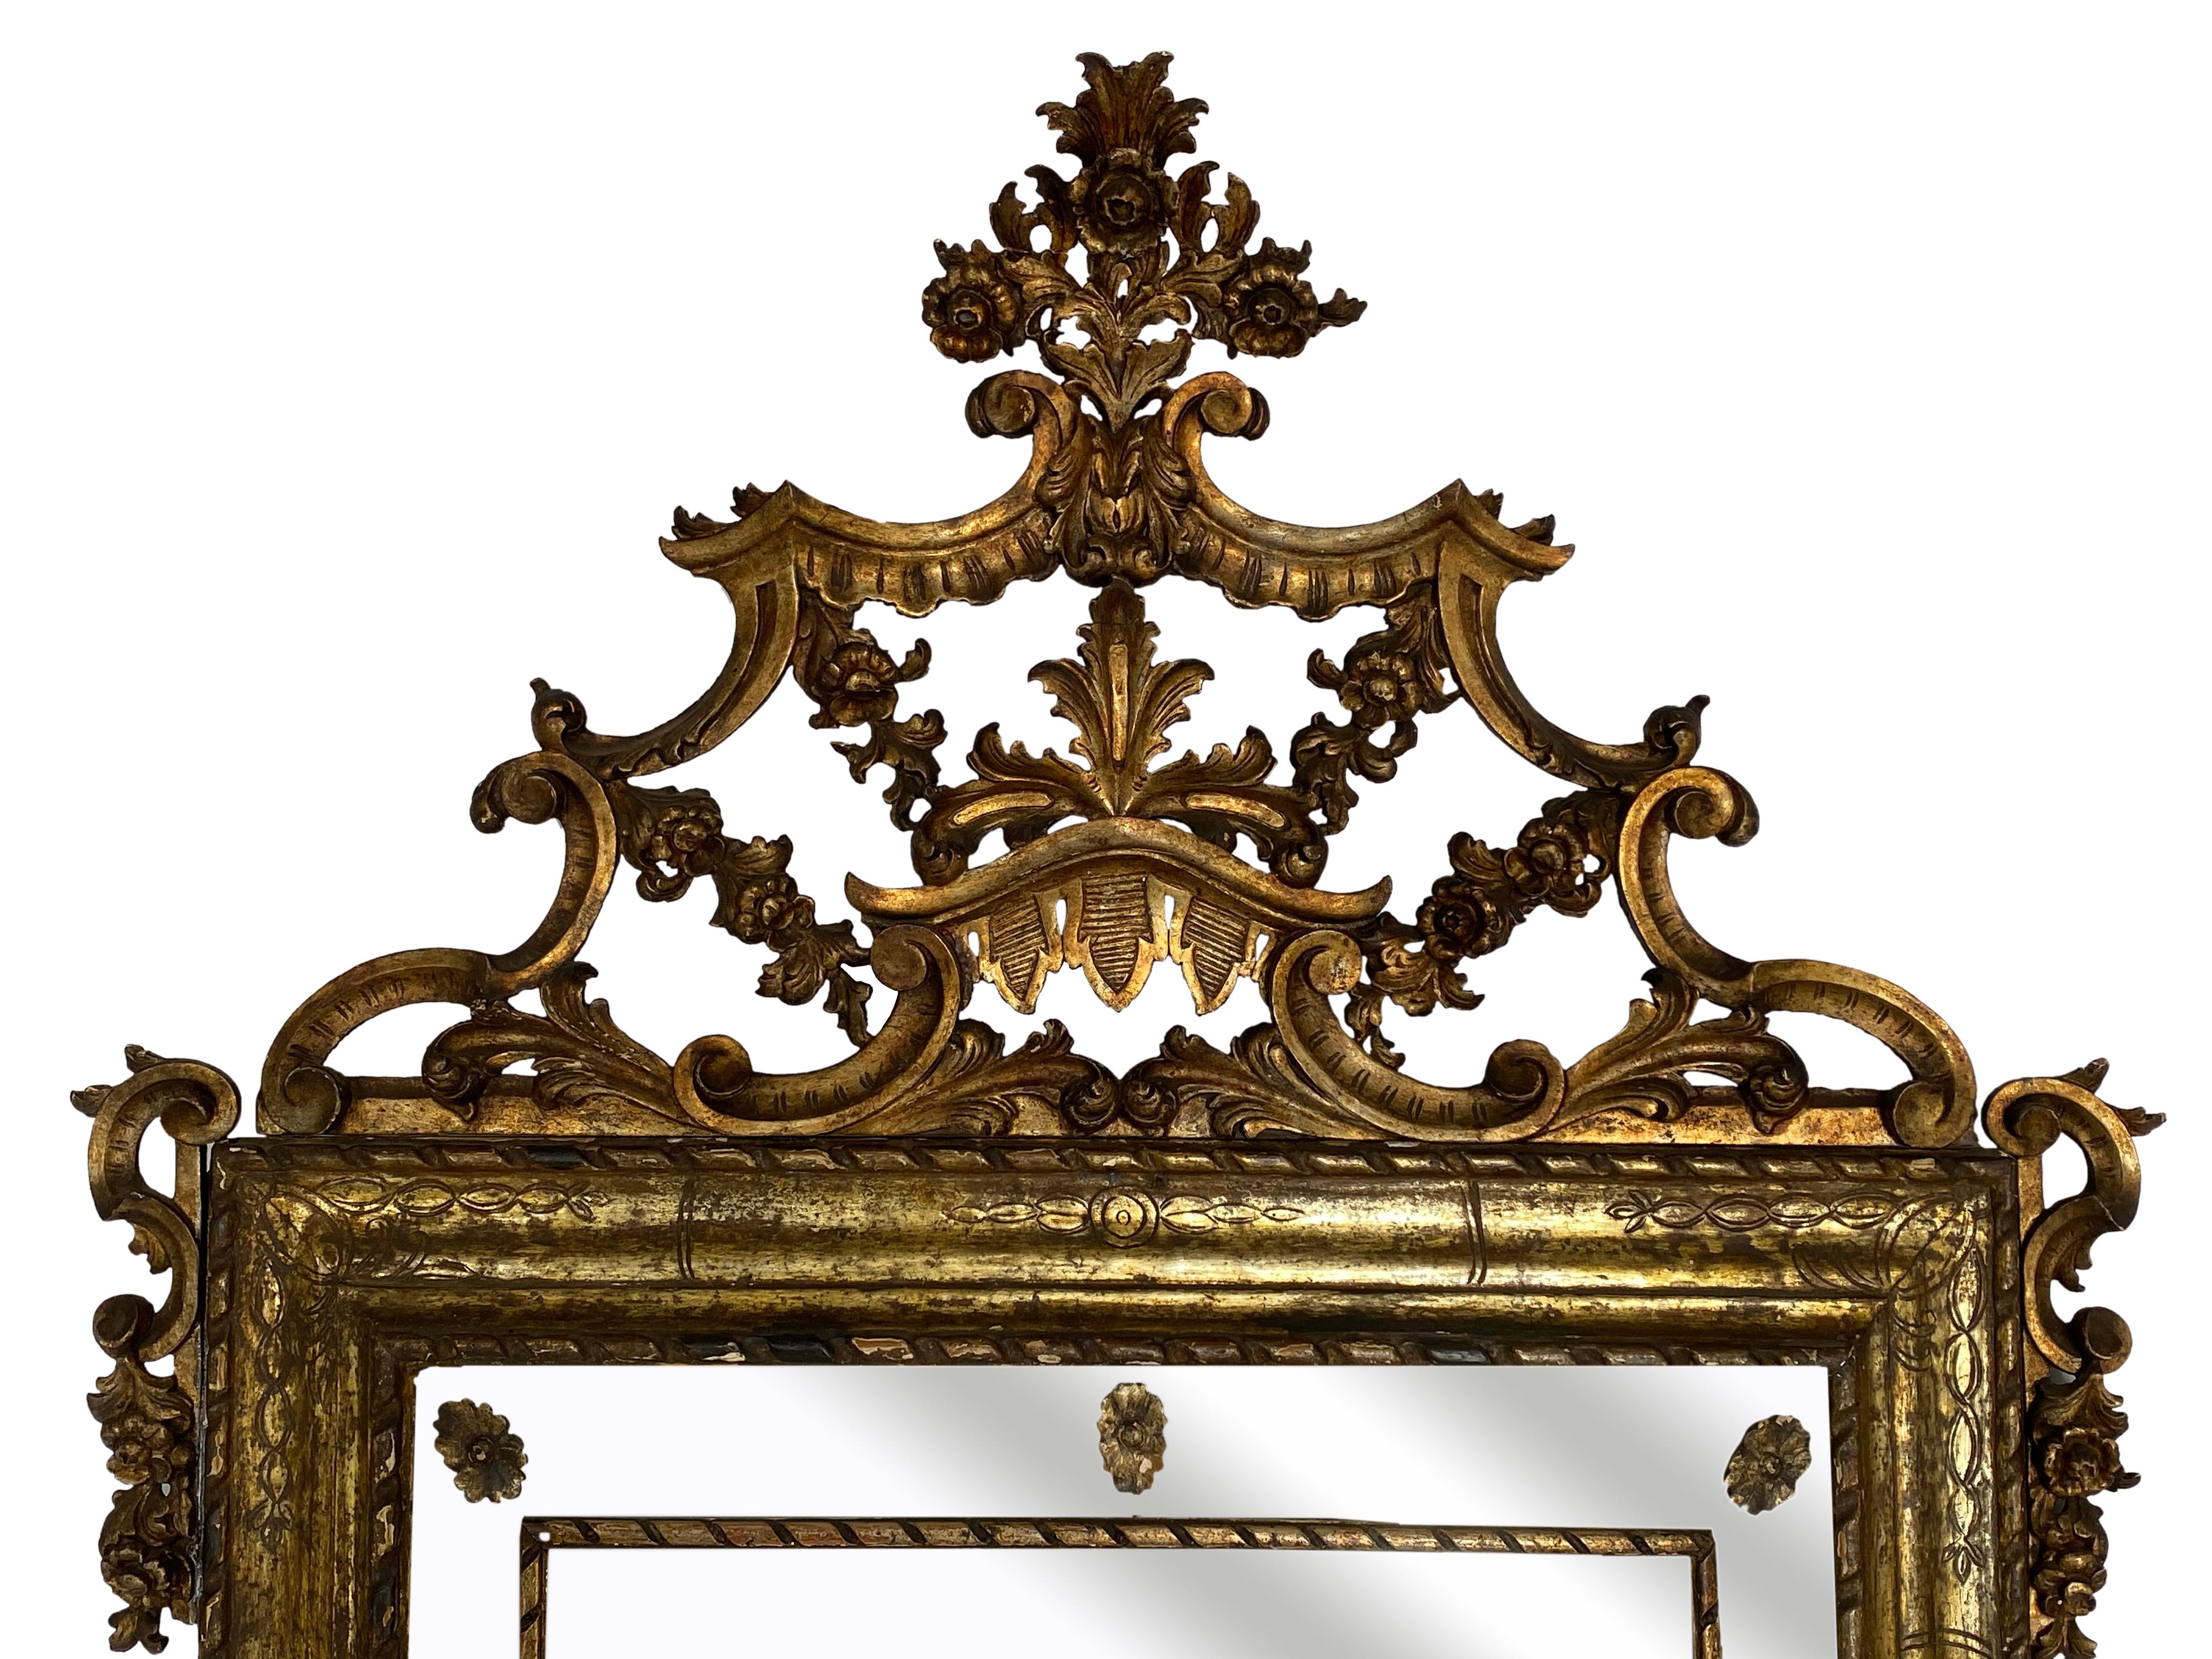 18th century Northern Italian Rococo giltwood mirror. Very detailed carving.